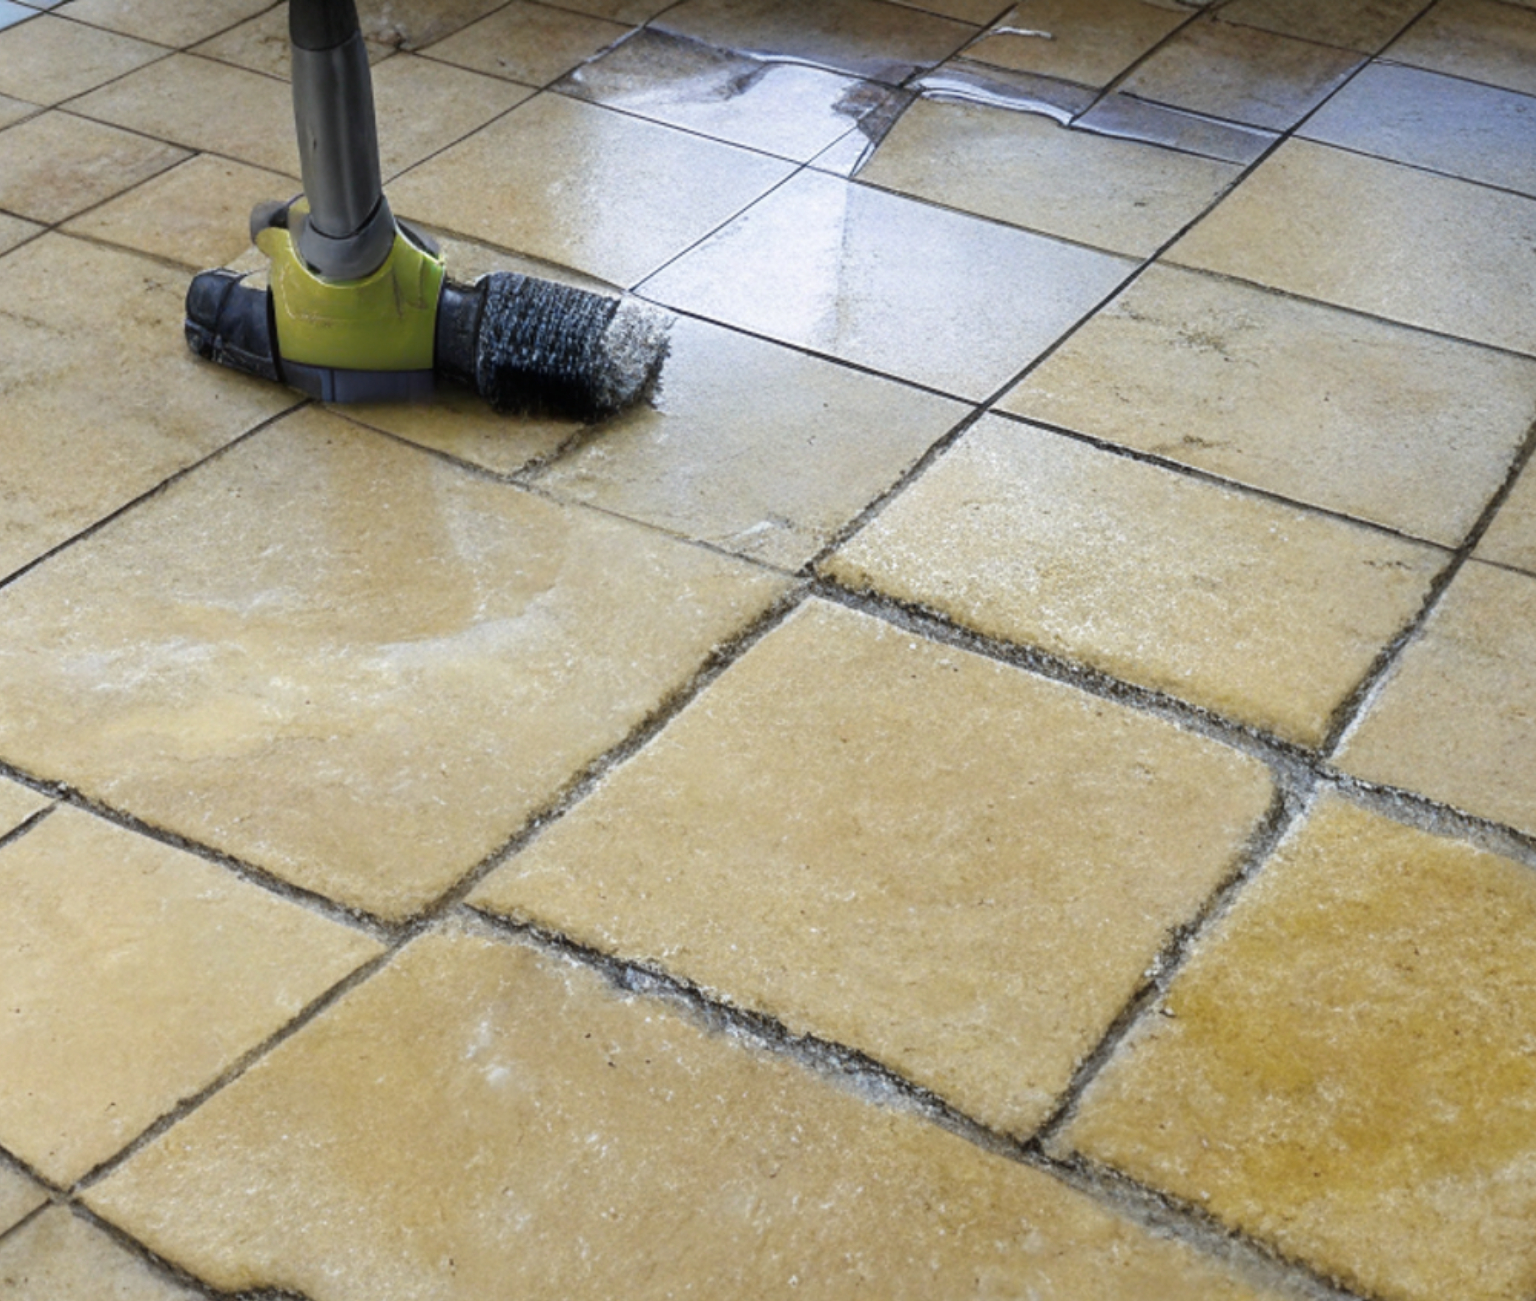 Tile and Grout Cleaning in Riverton | Orem | Salt Lake City | Best Tile Grout Cleaners Utah | Vital Clean LLC